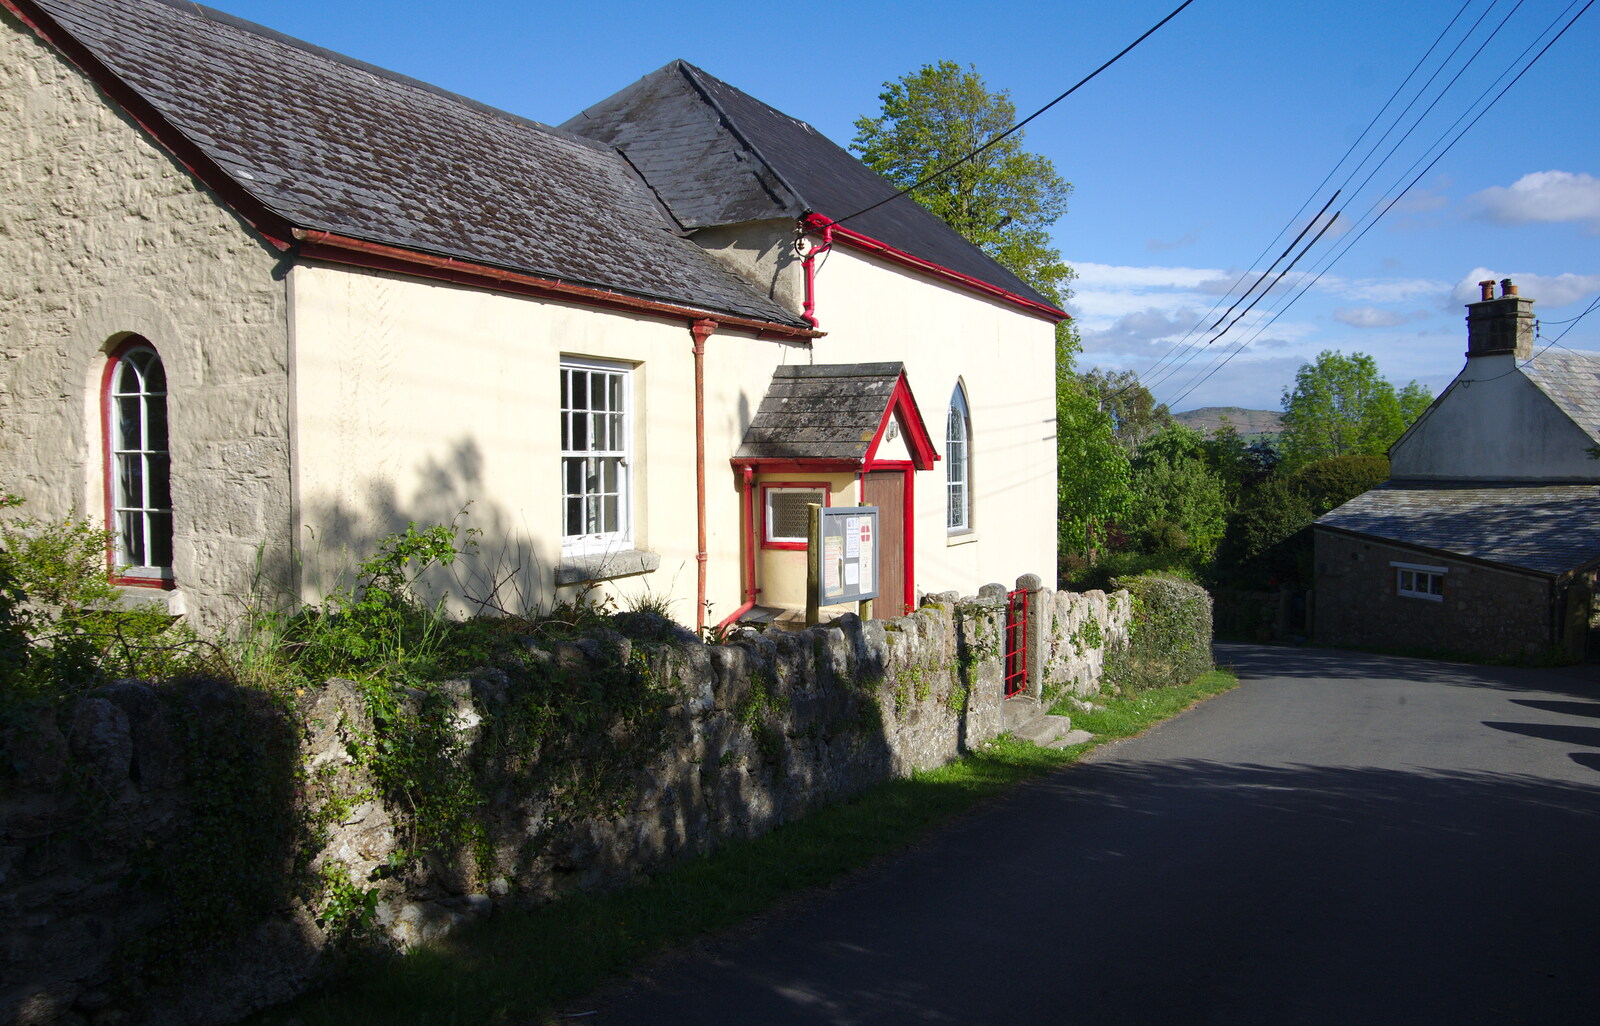 The quaint Providence Chapel from Chagford Lido and a Trip to Parke, Bovey Tracey, Devon - 25th May 2019